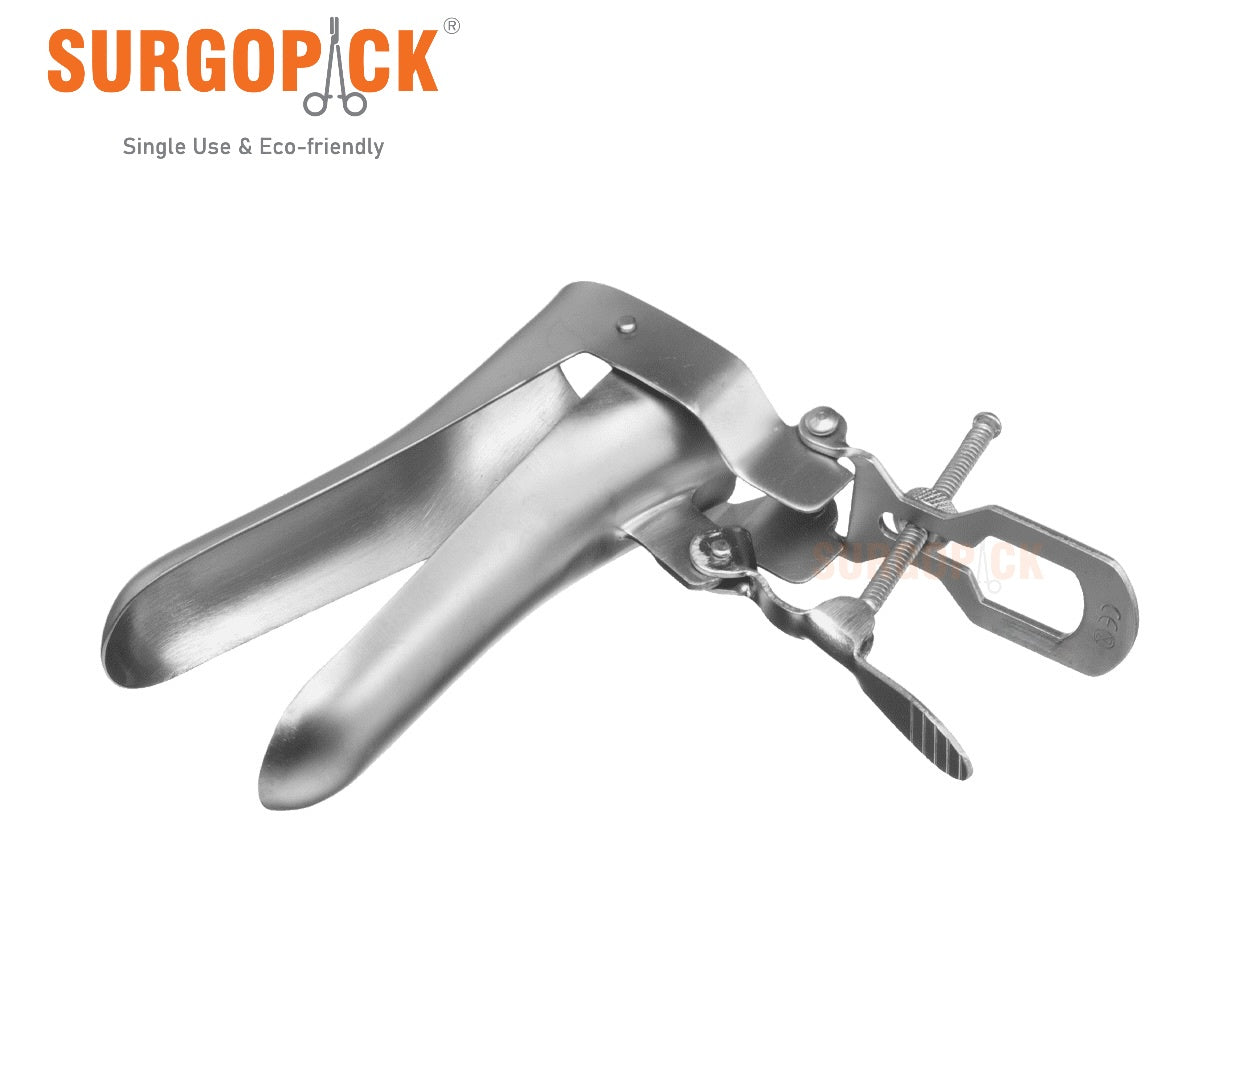 Box 20 Surgopack® Sterile Single Use Cusco Vaginal Speculum Large Size Individually Packed Stainless Steel - EmpireMedical 